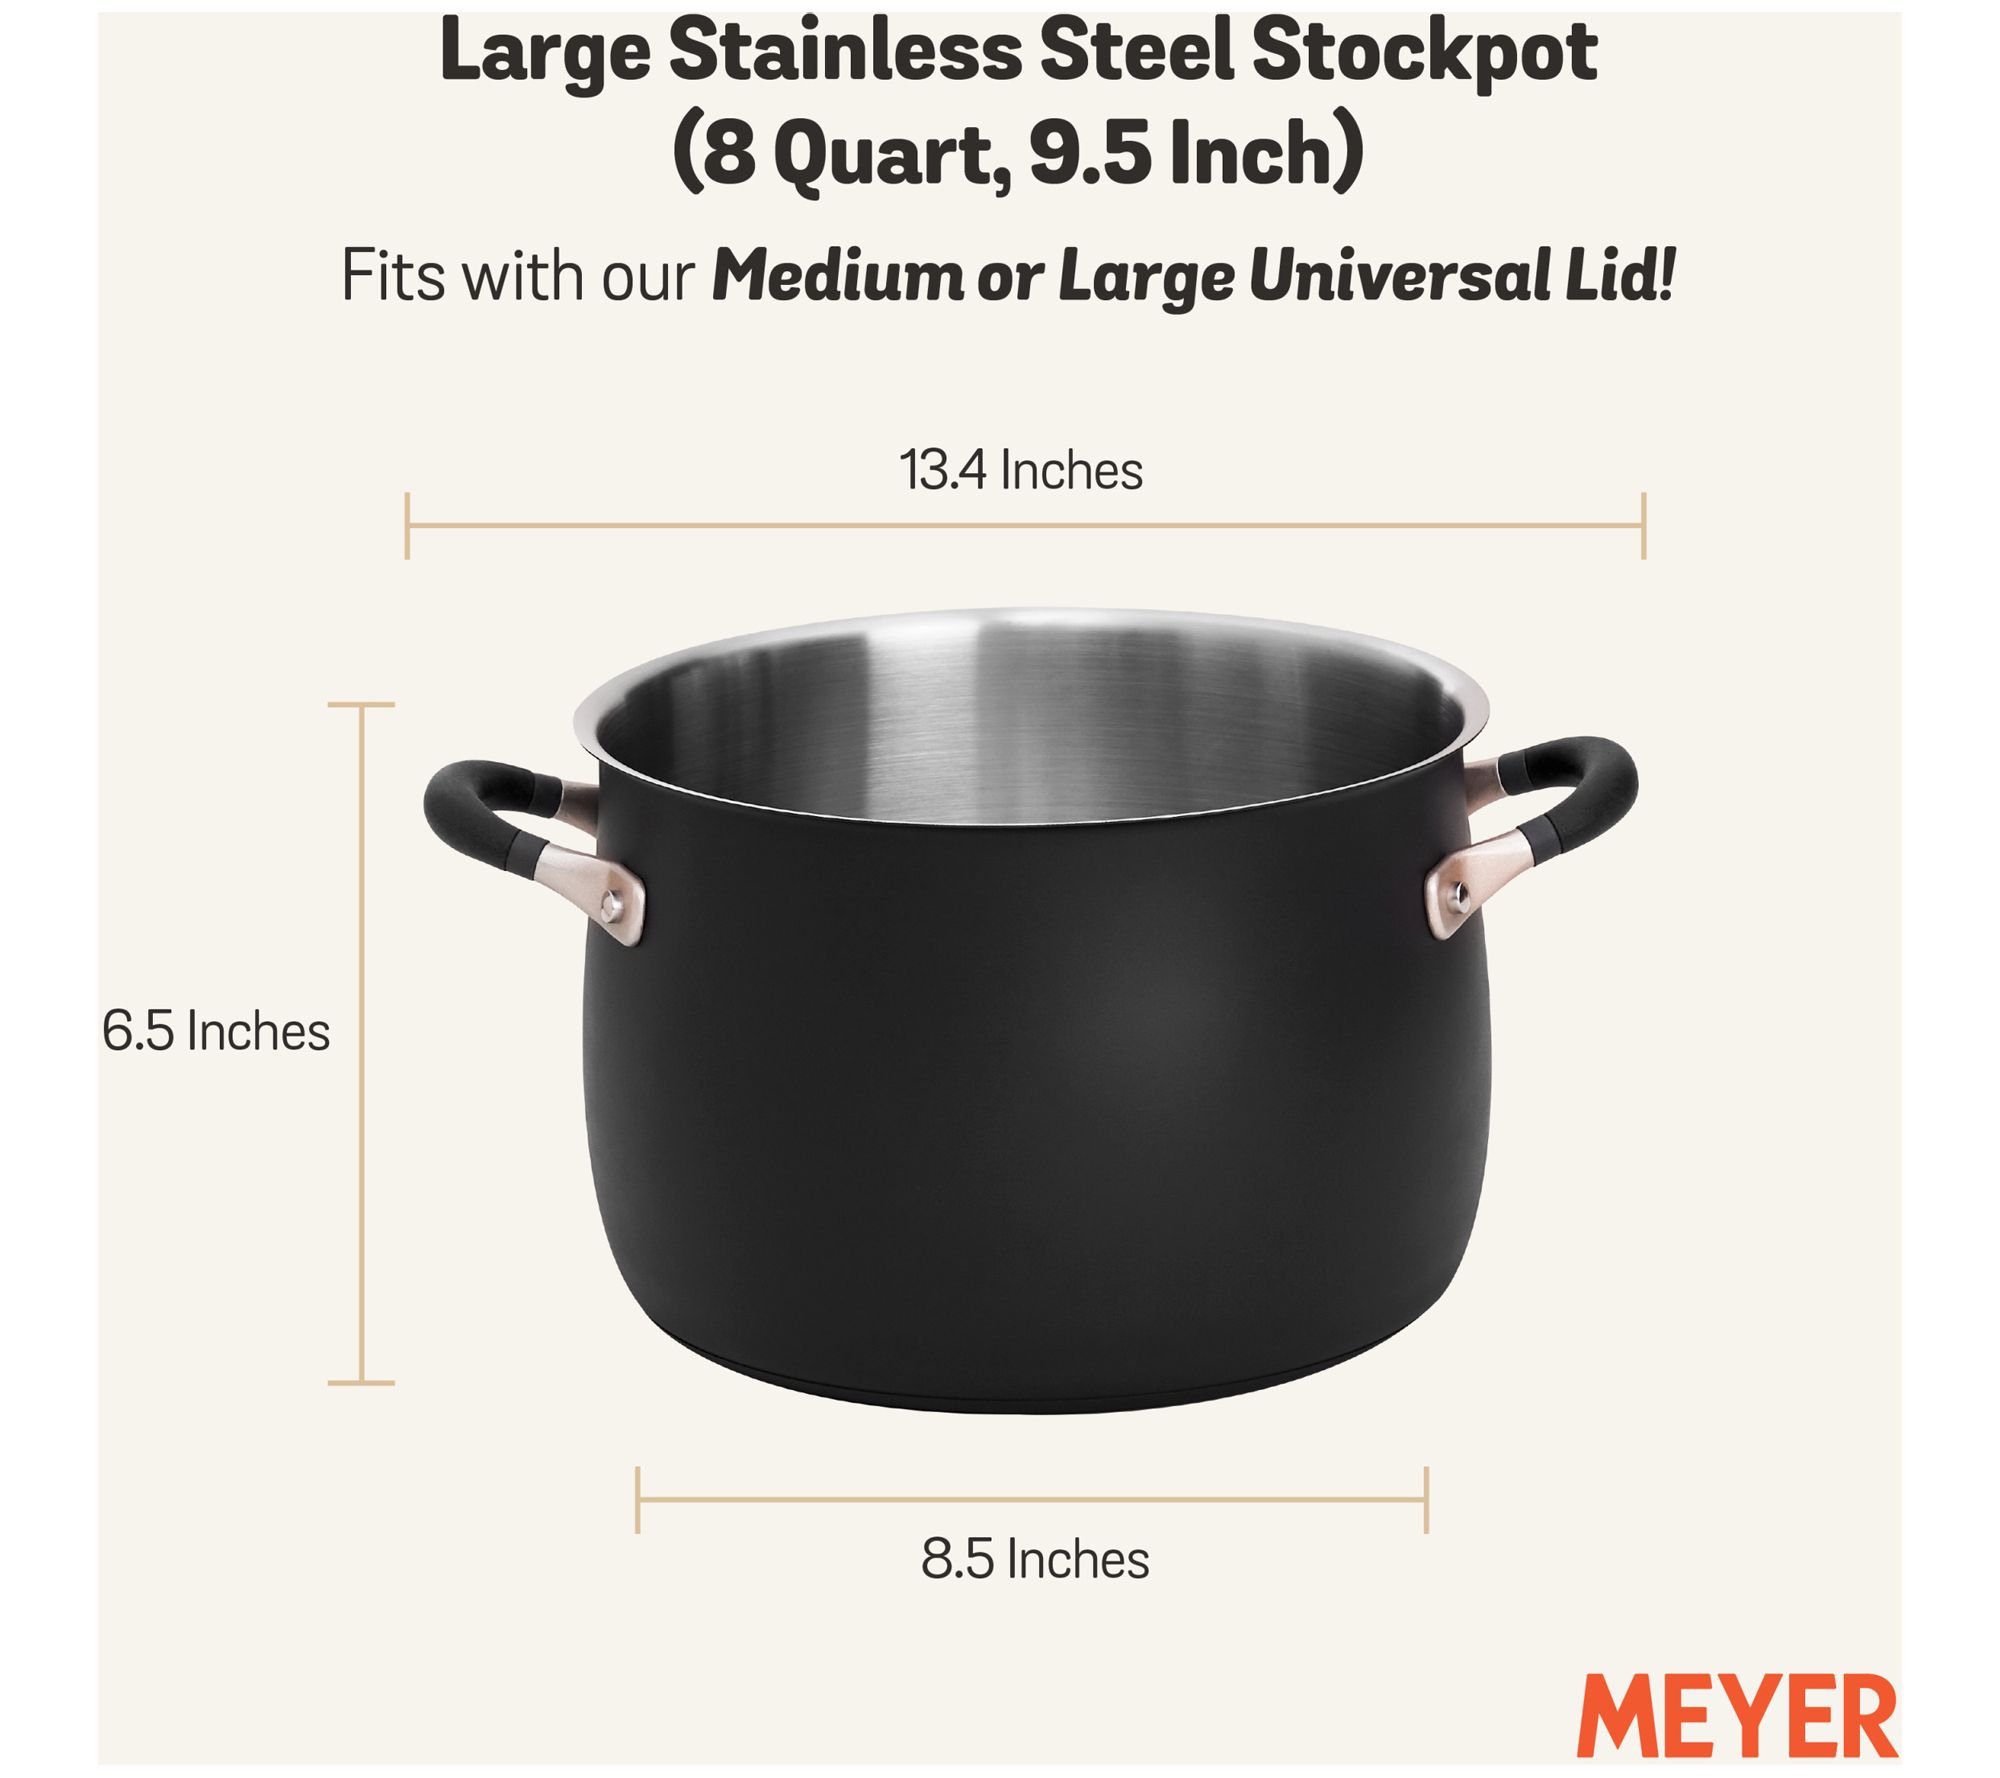 BERGNER Small 2.6 qt. Stainless Steel Soup Pot with Tempered Glass